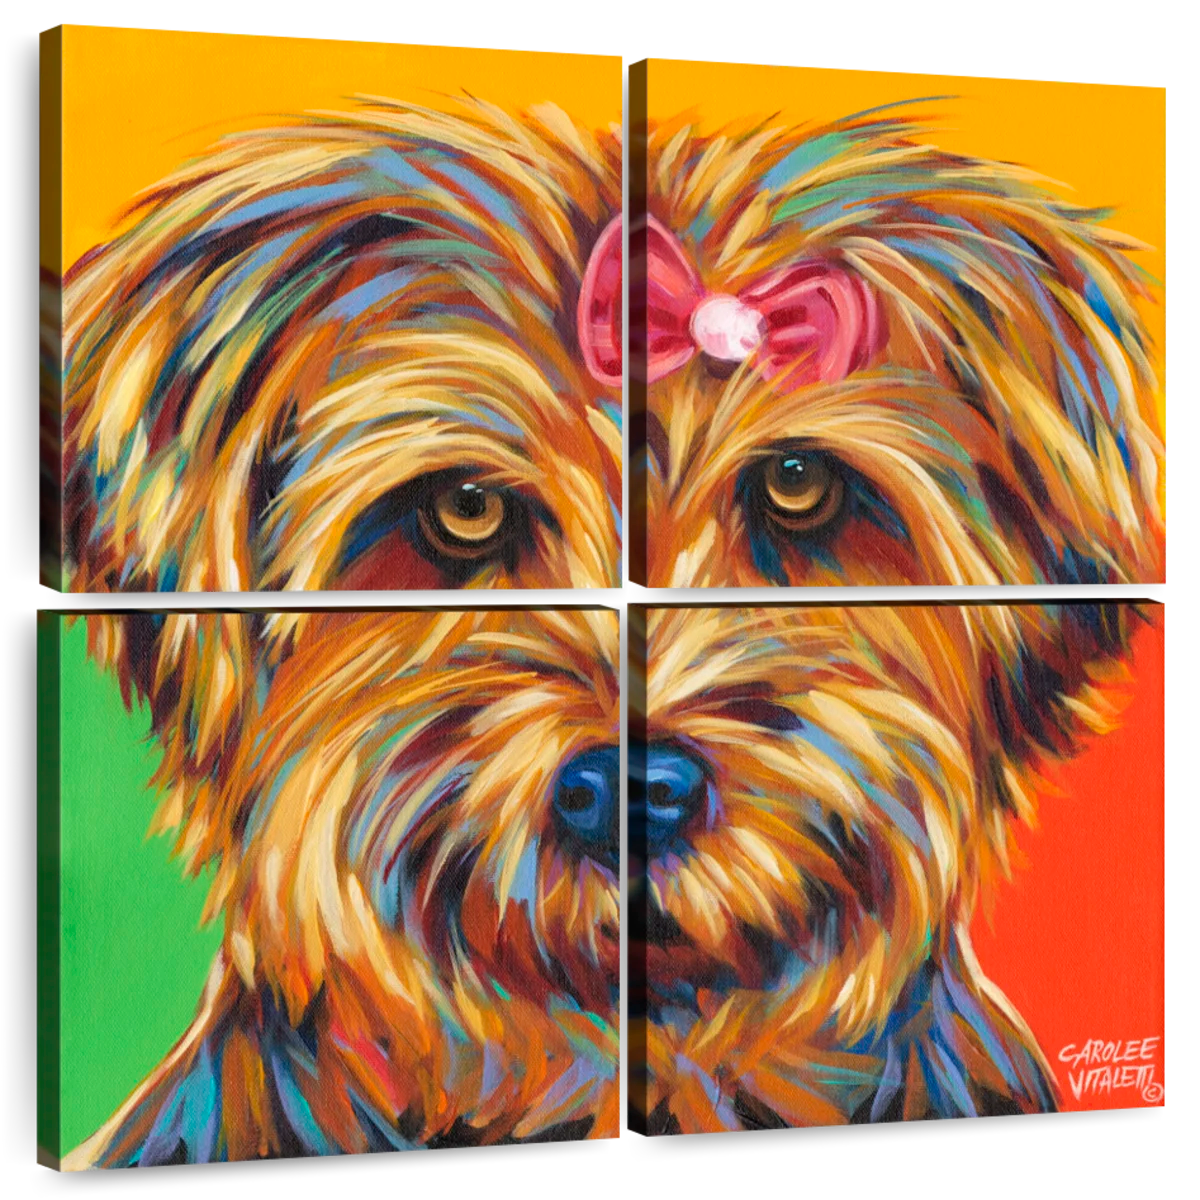  LV Wall Decor - Glam Wall Decor - Fashion Wall Art - Luxury  High Fashion Room Decor, Home Decoration for Bedroom, Living Room - Yorkie,  Yorkshire Terrier, Puppy, Dog Lovers Gifts